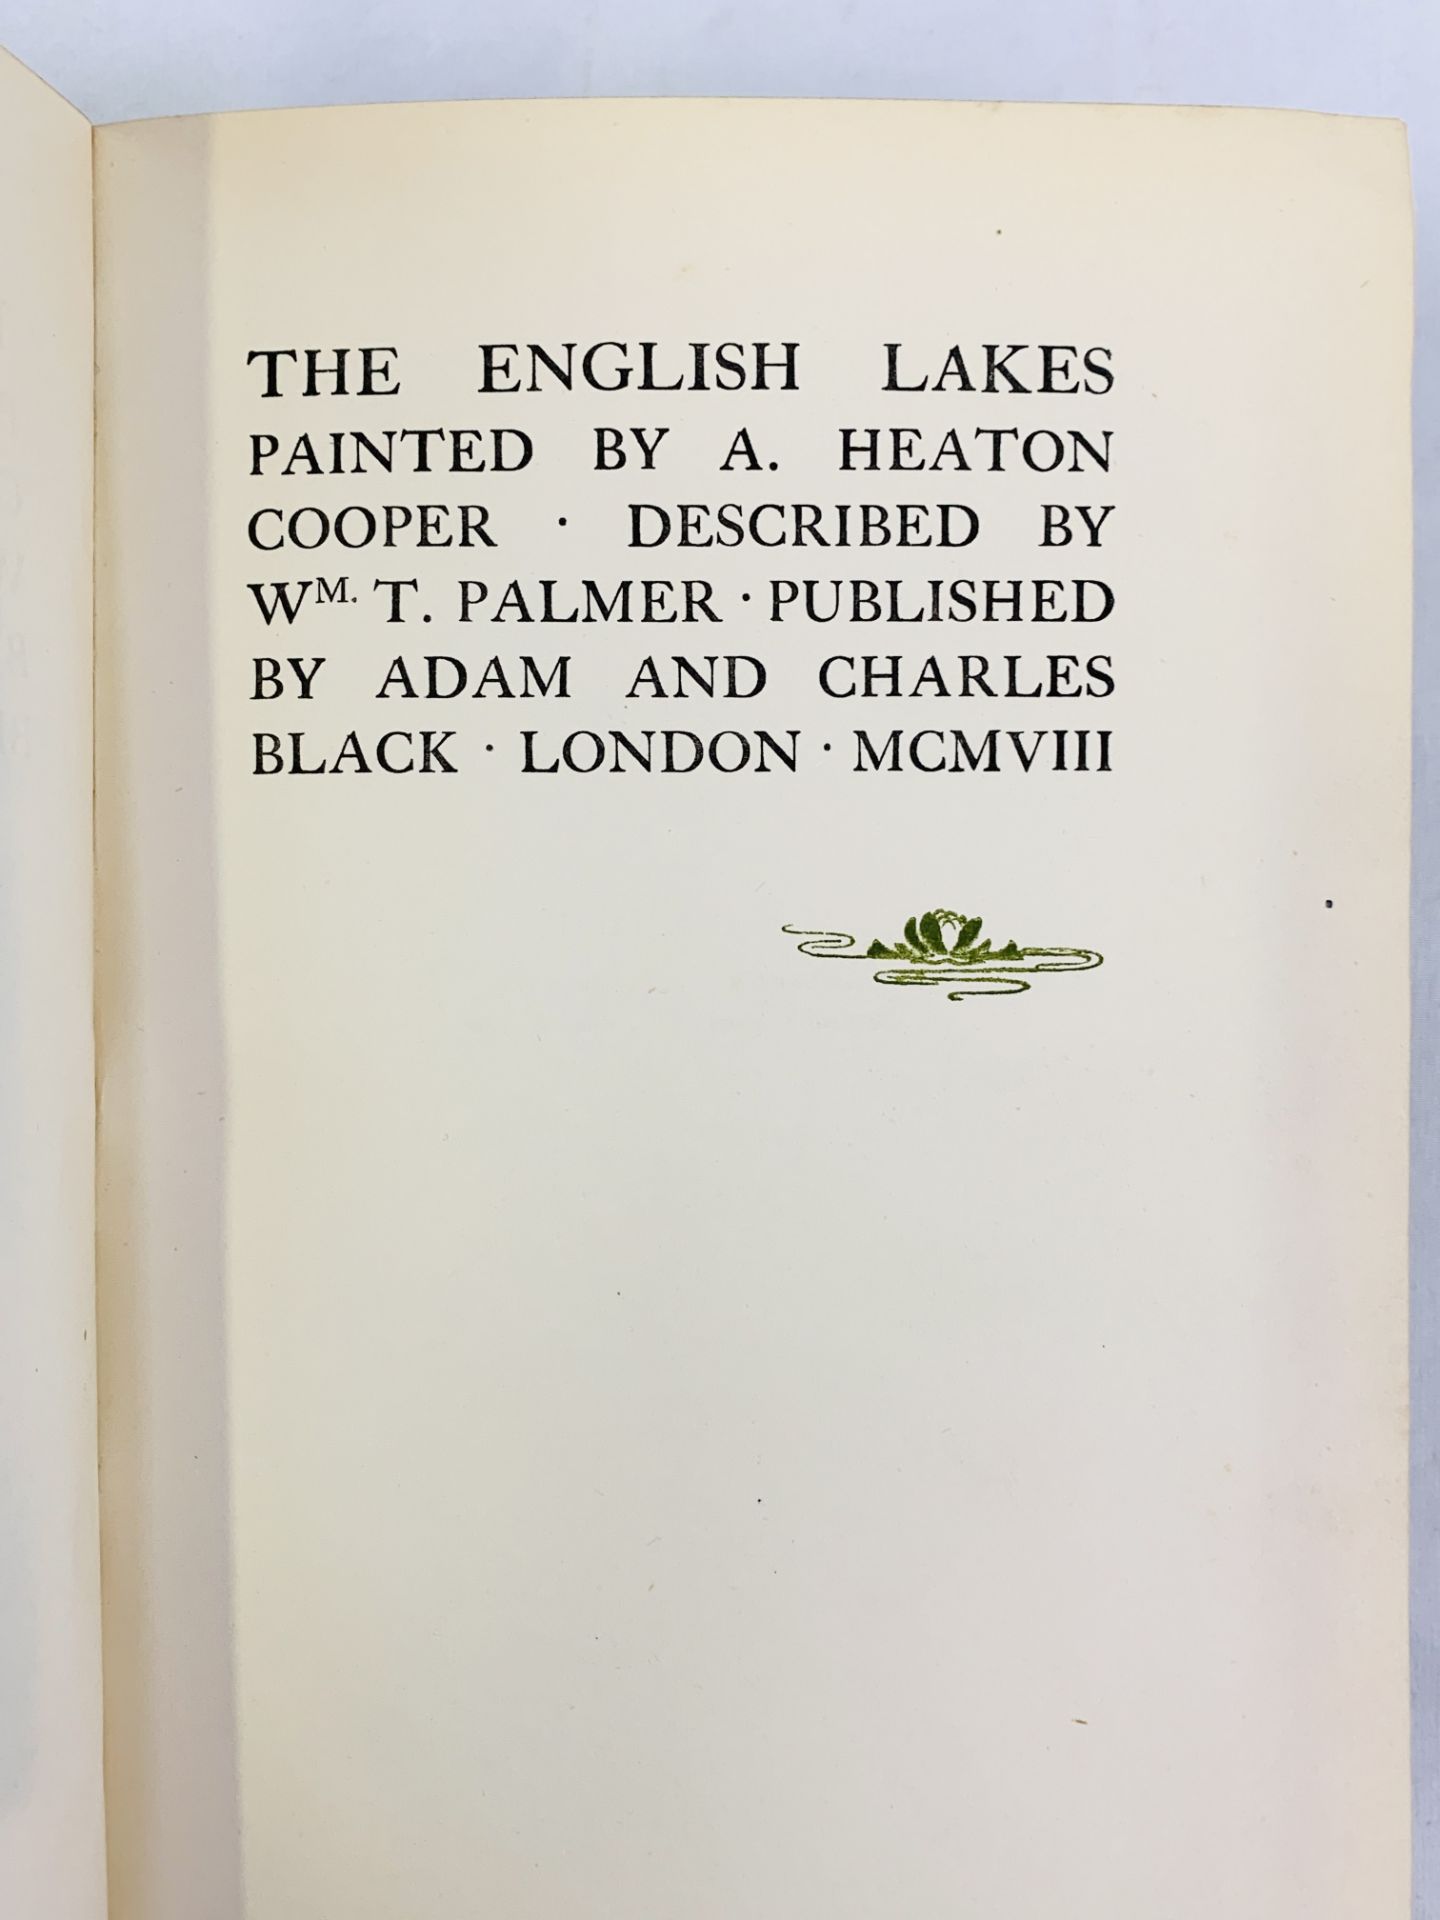 The English Lakes Painted by A. Heaton Cooper, William Palmer, 1908, 2nd edition. - Image 2 of 5